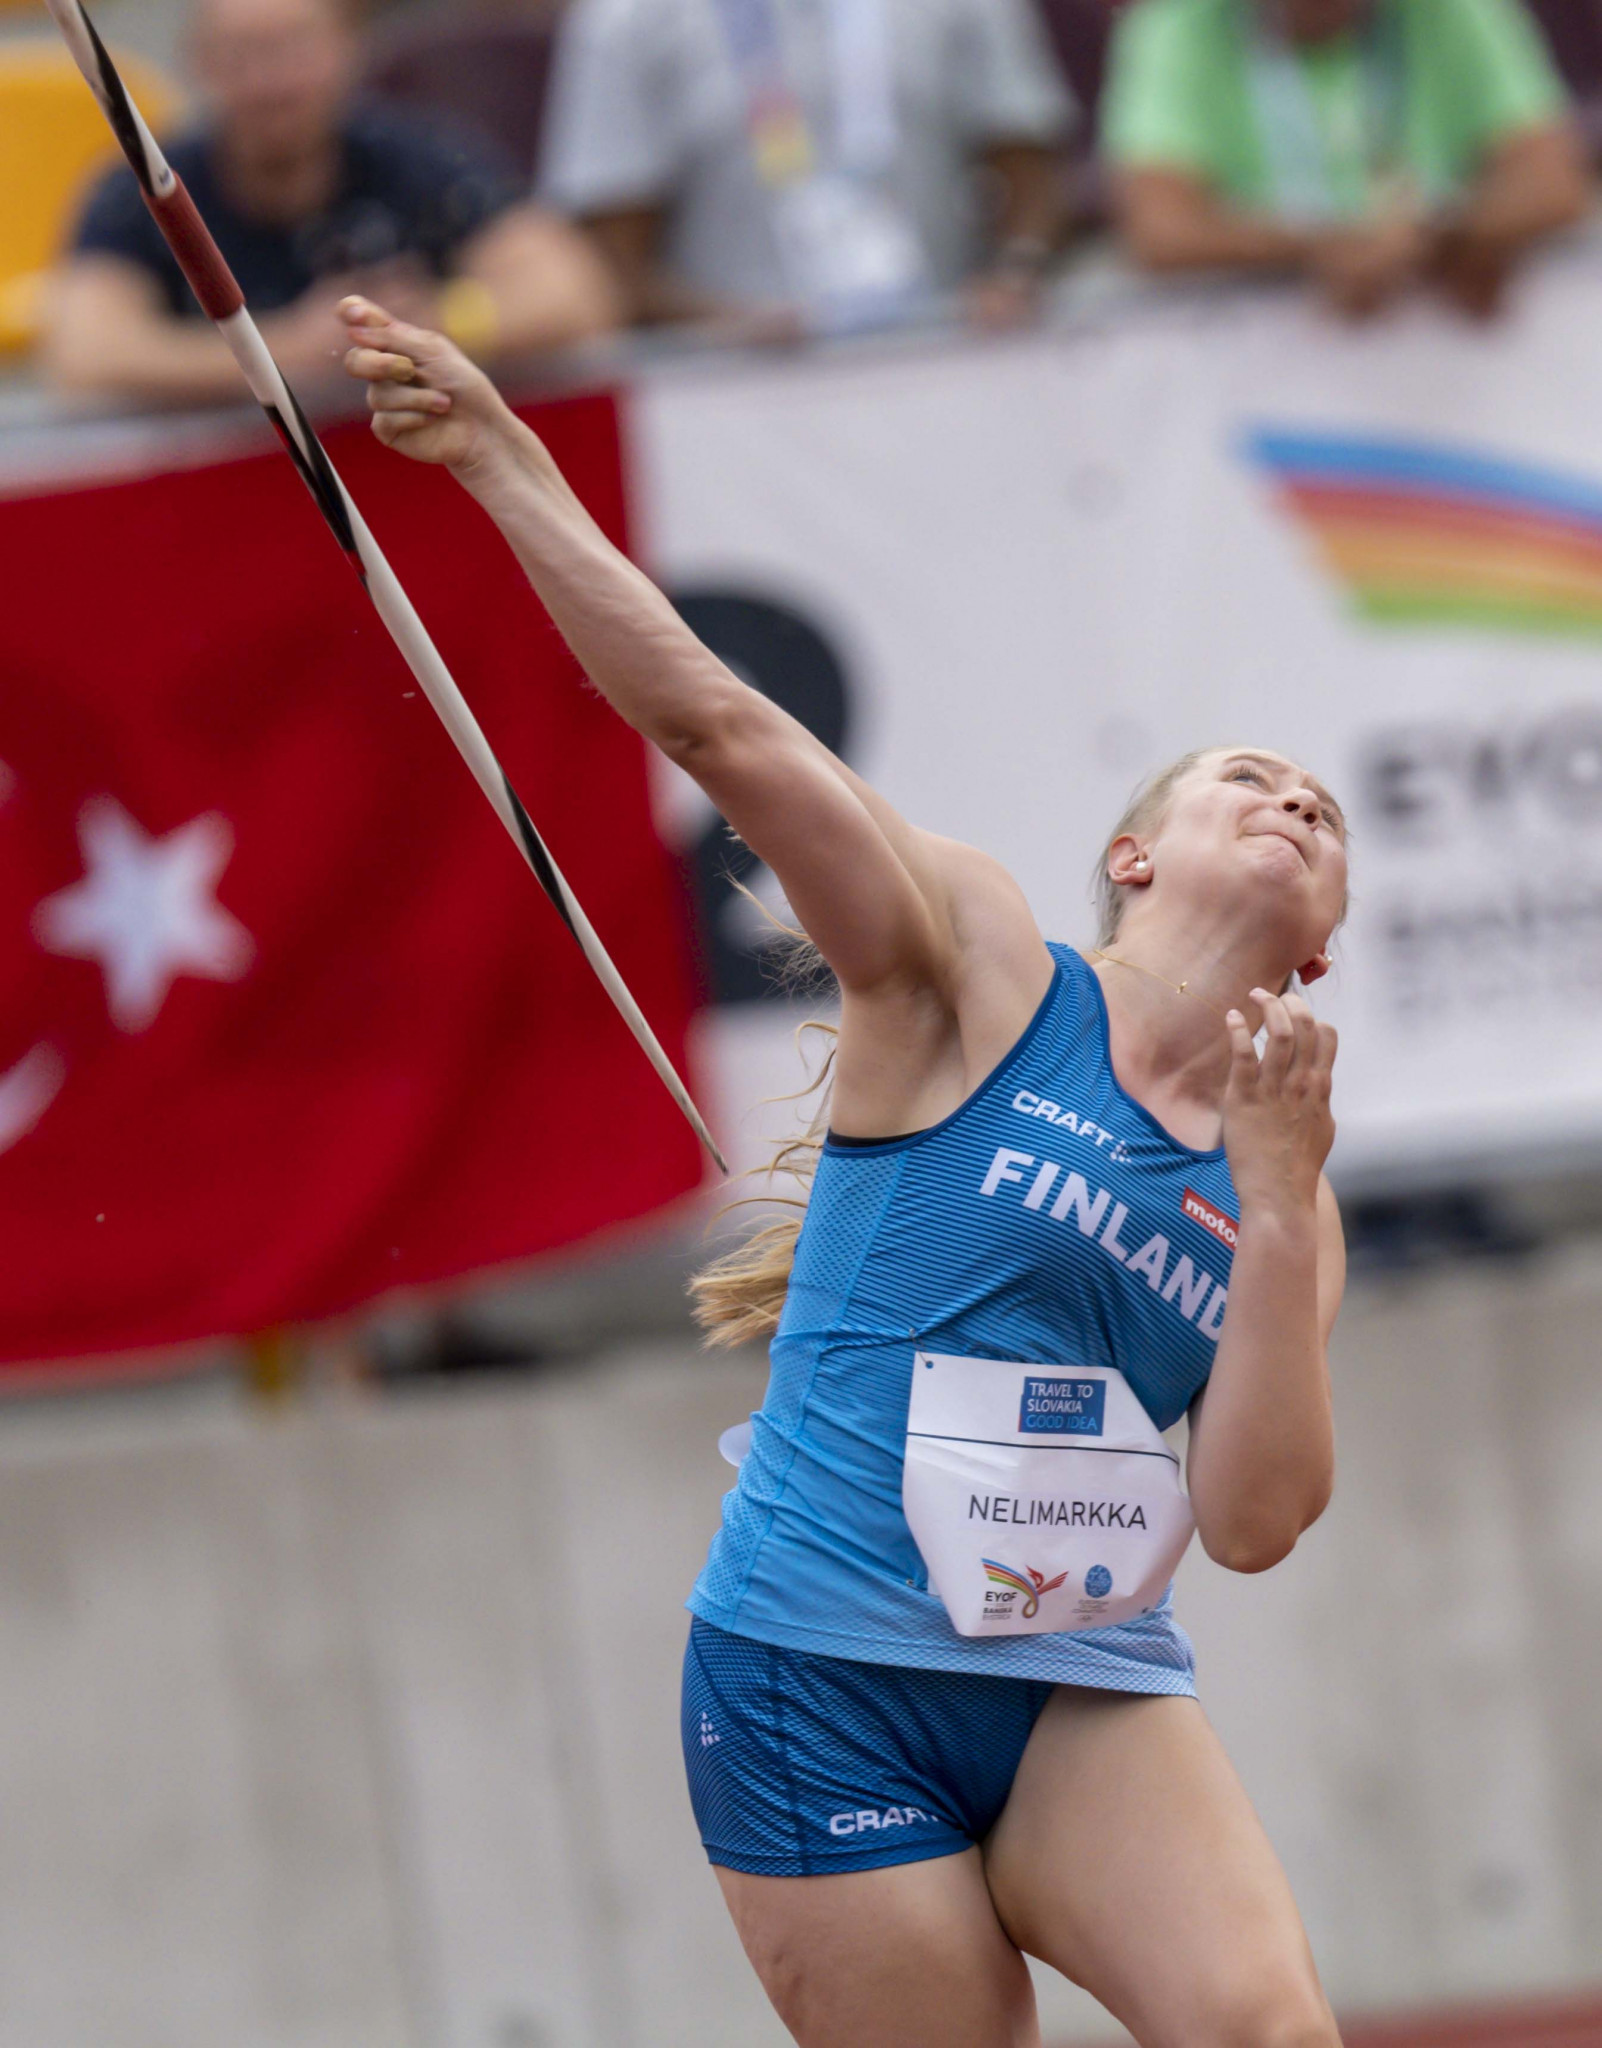 A personal best 51.69m throw was enough for Finland's Rebecca Nelimarkka to end up triumphant in the girls' javelin  ©EYOF Banská Bystrica 2022